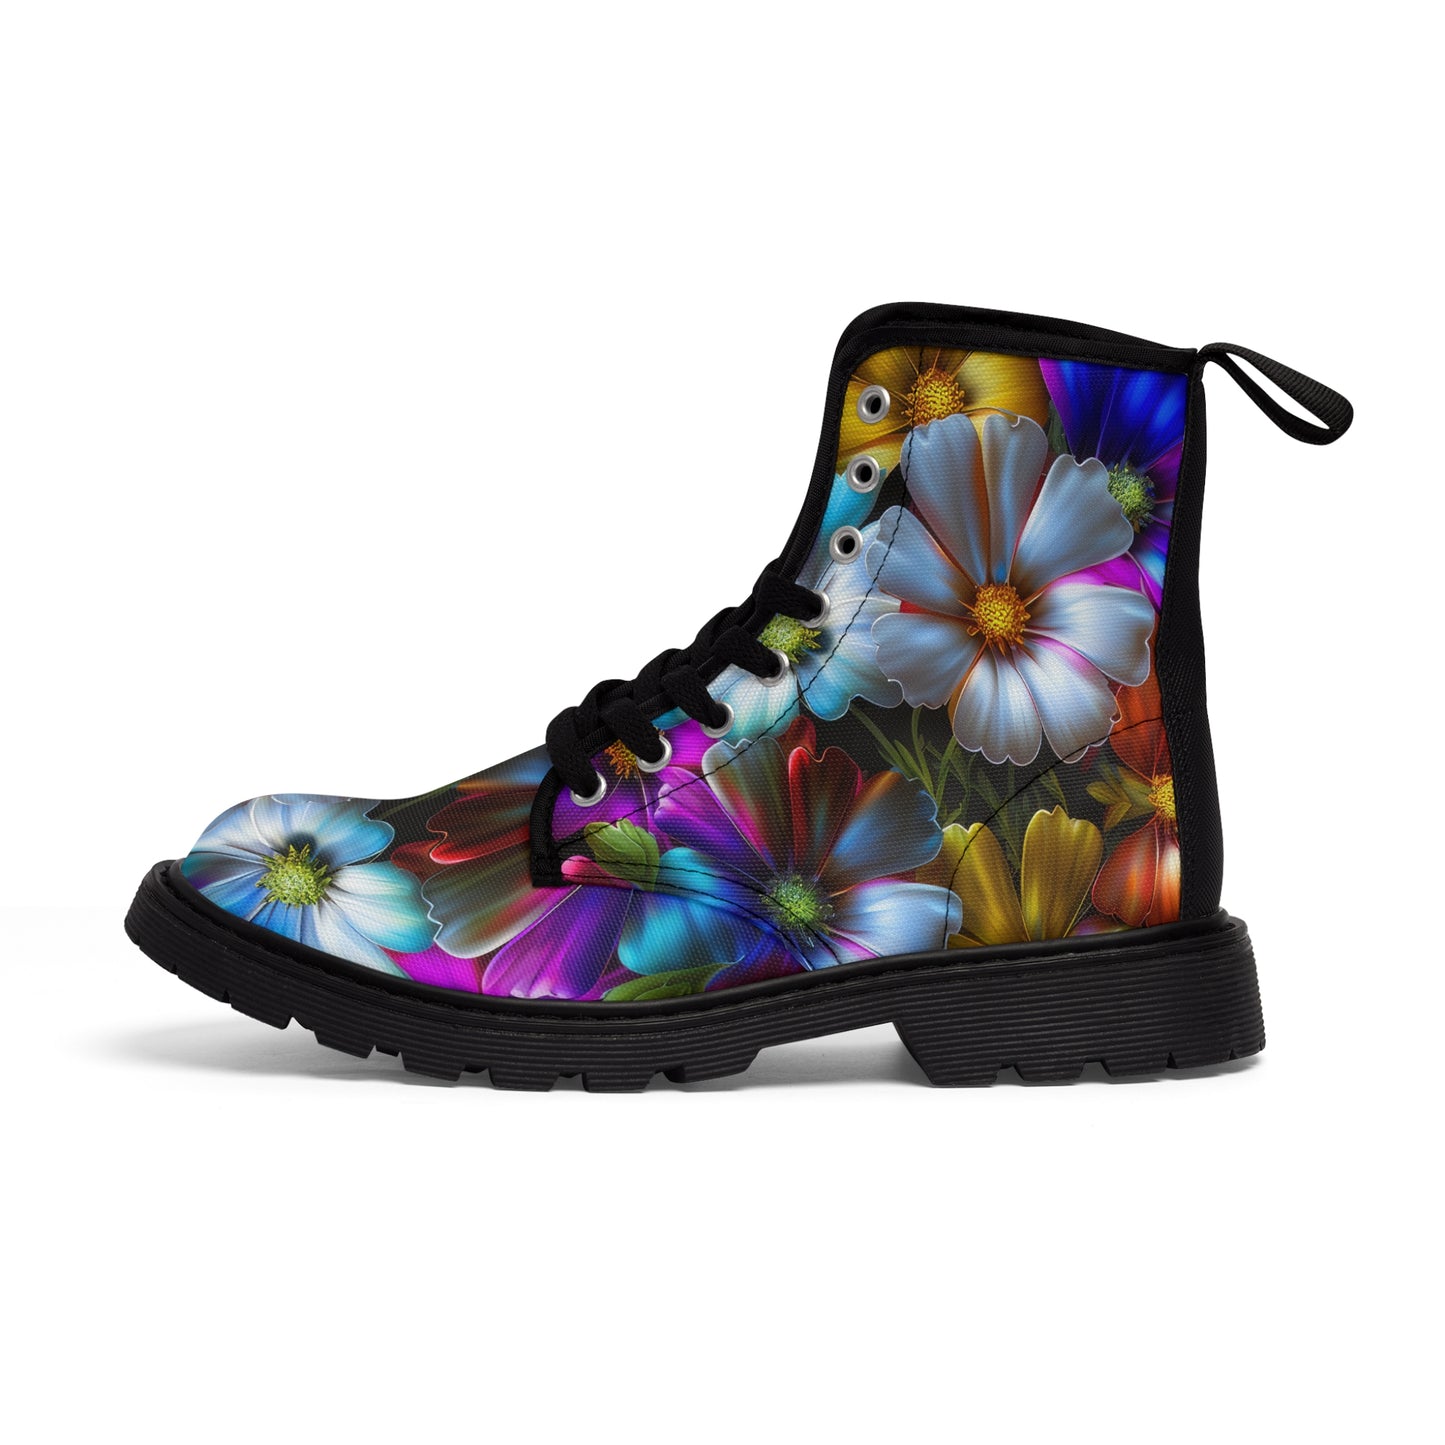 Bold & Beautiful & Metallic Wildflowers, Gorgeous floral Design, Style 5 Women's Canvas Boots